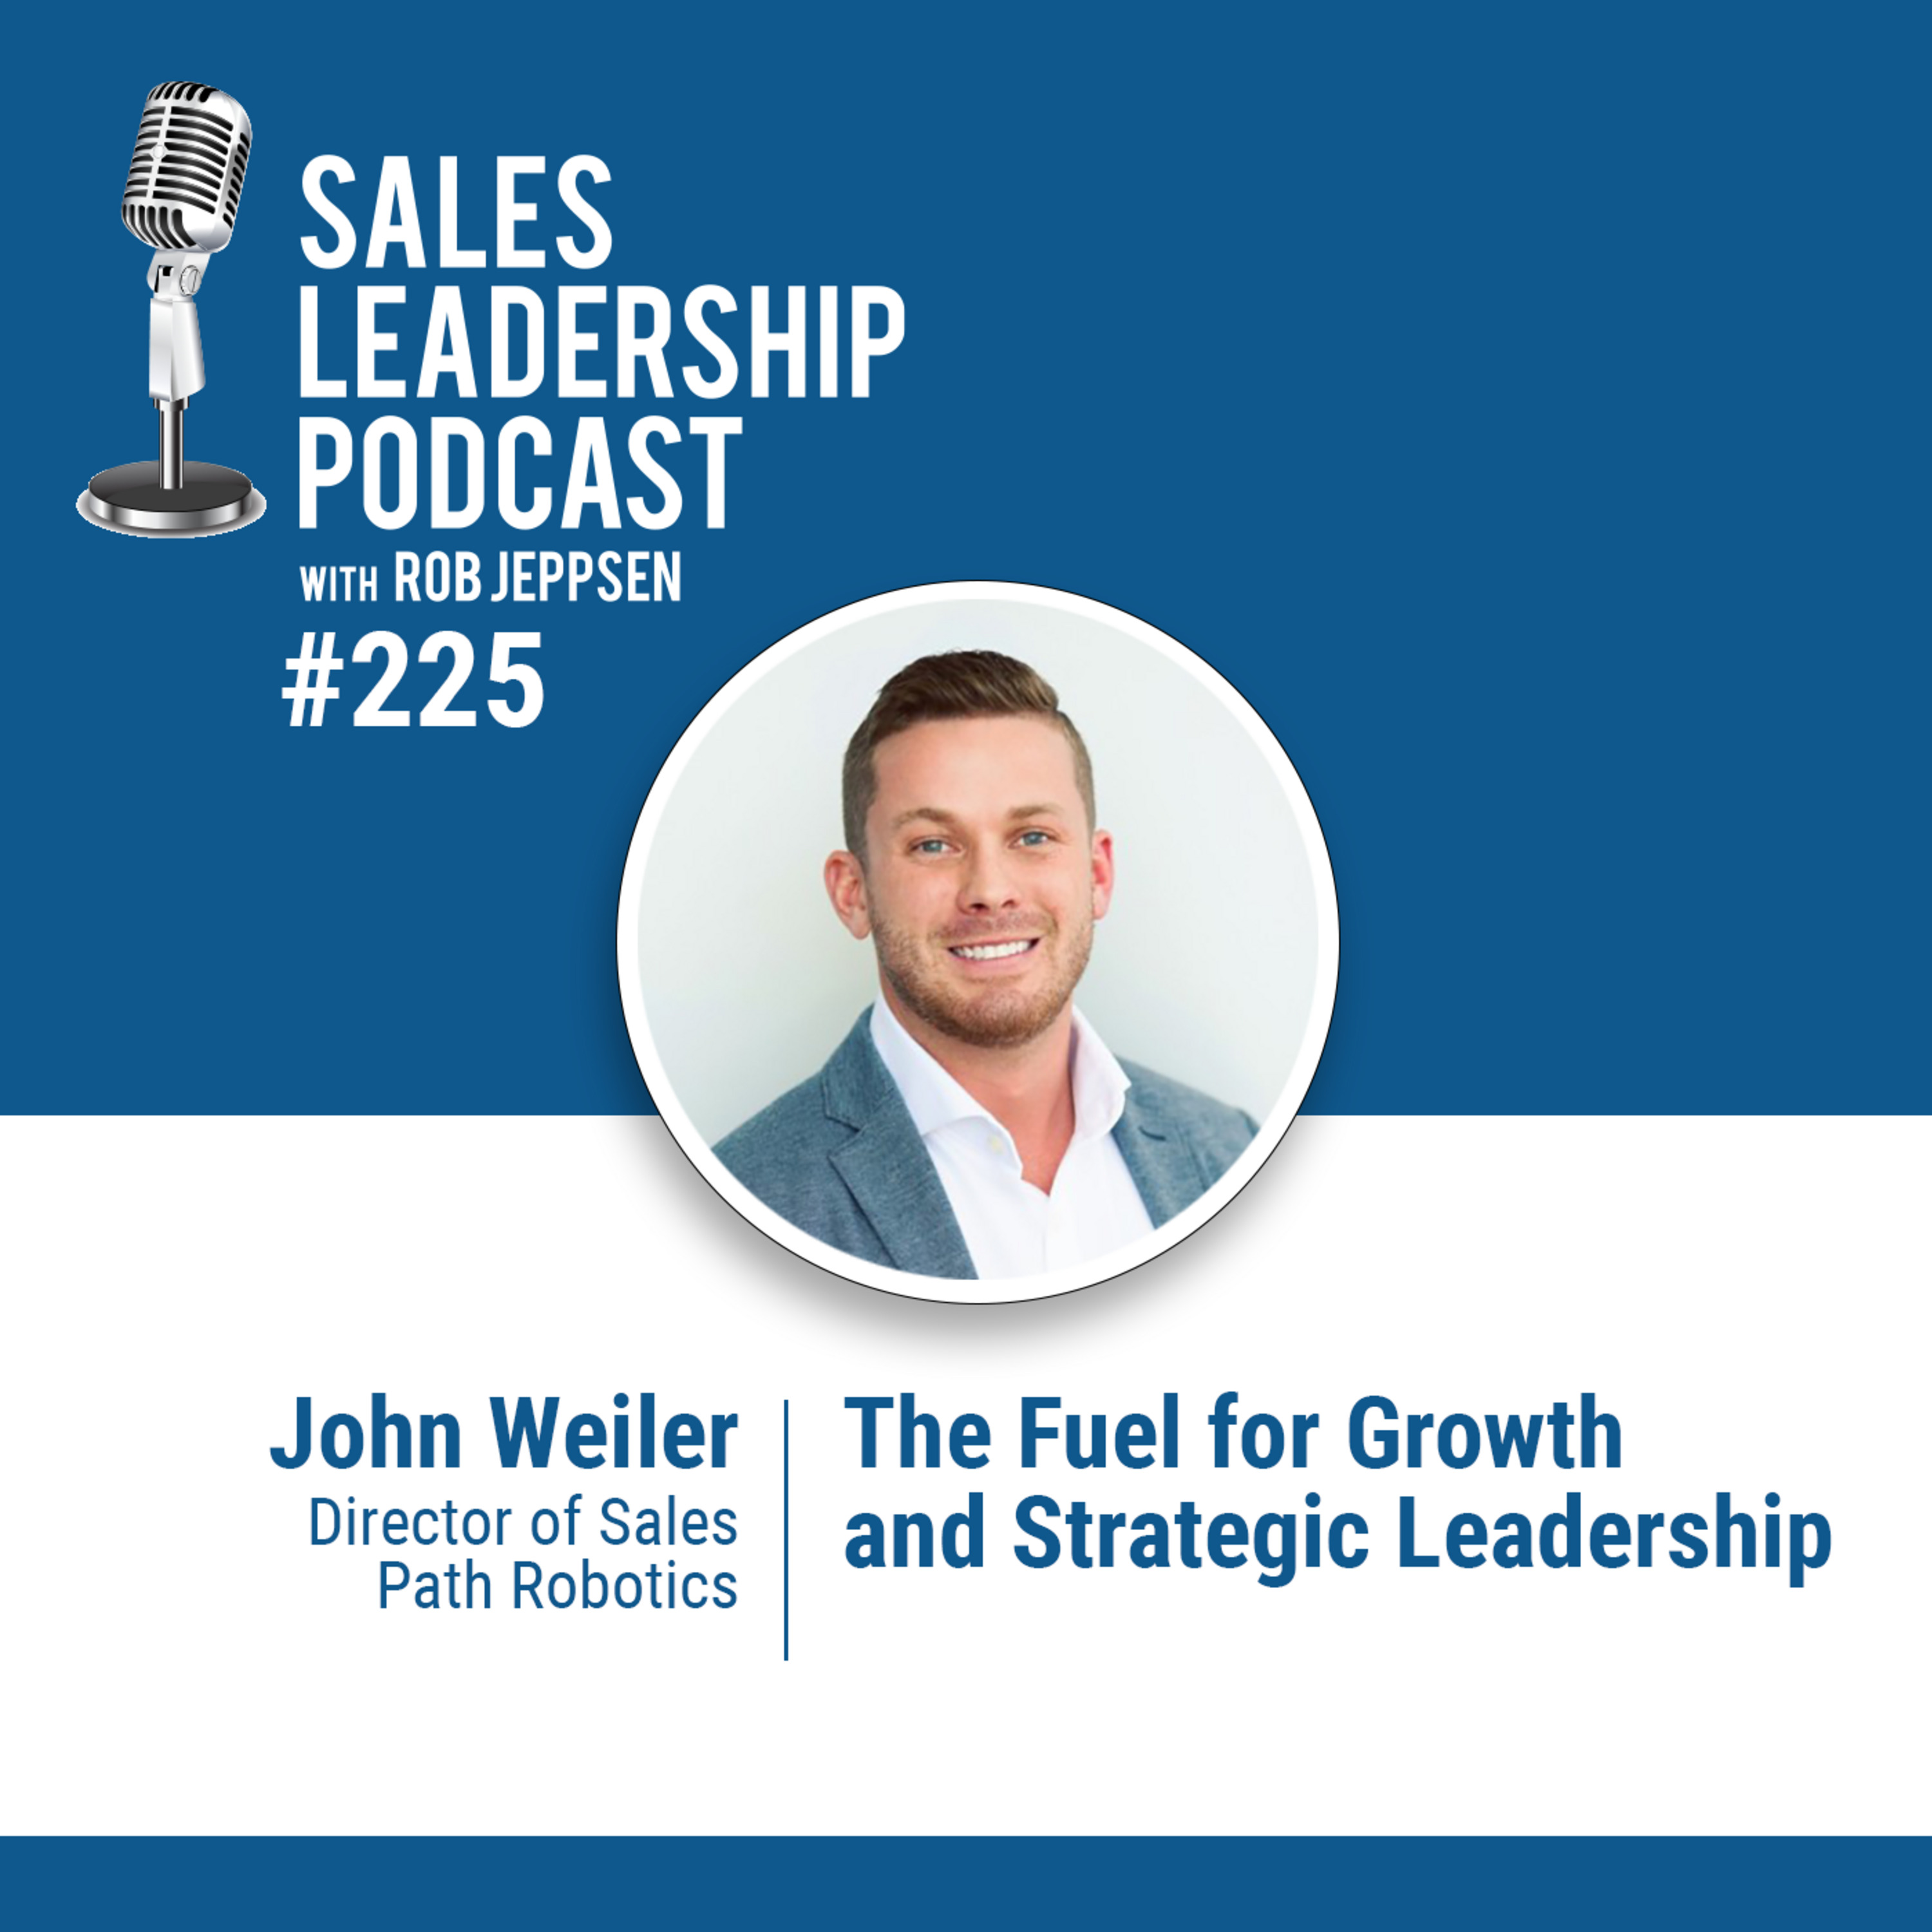 Episode 226: John Weiler, Director of Sales at Path Robotics — The Fuel for Growth and Strategic Leadership